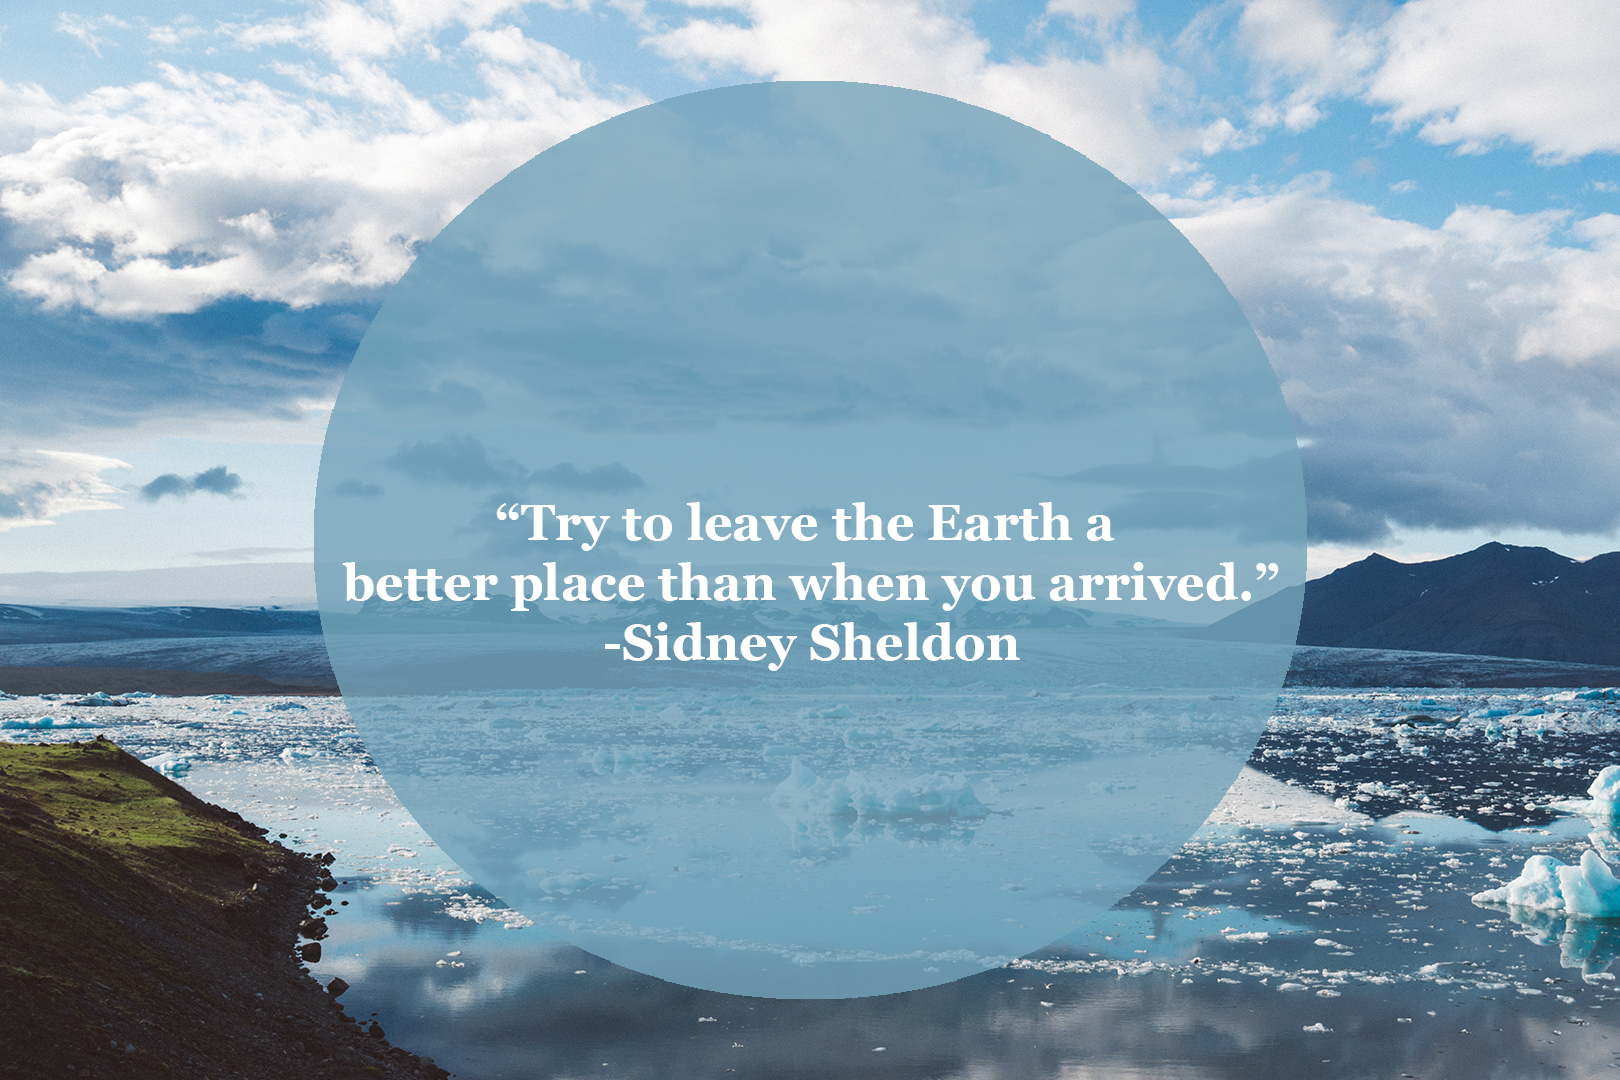 Try to leave the Earth a better place than when you arrived. Sidney Sheldon